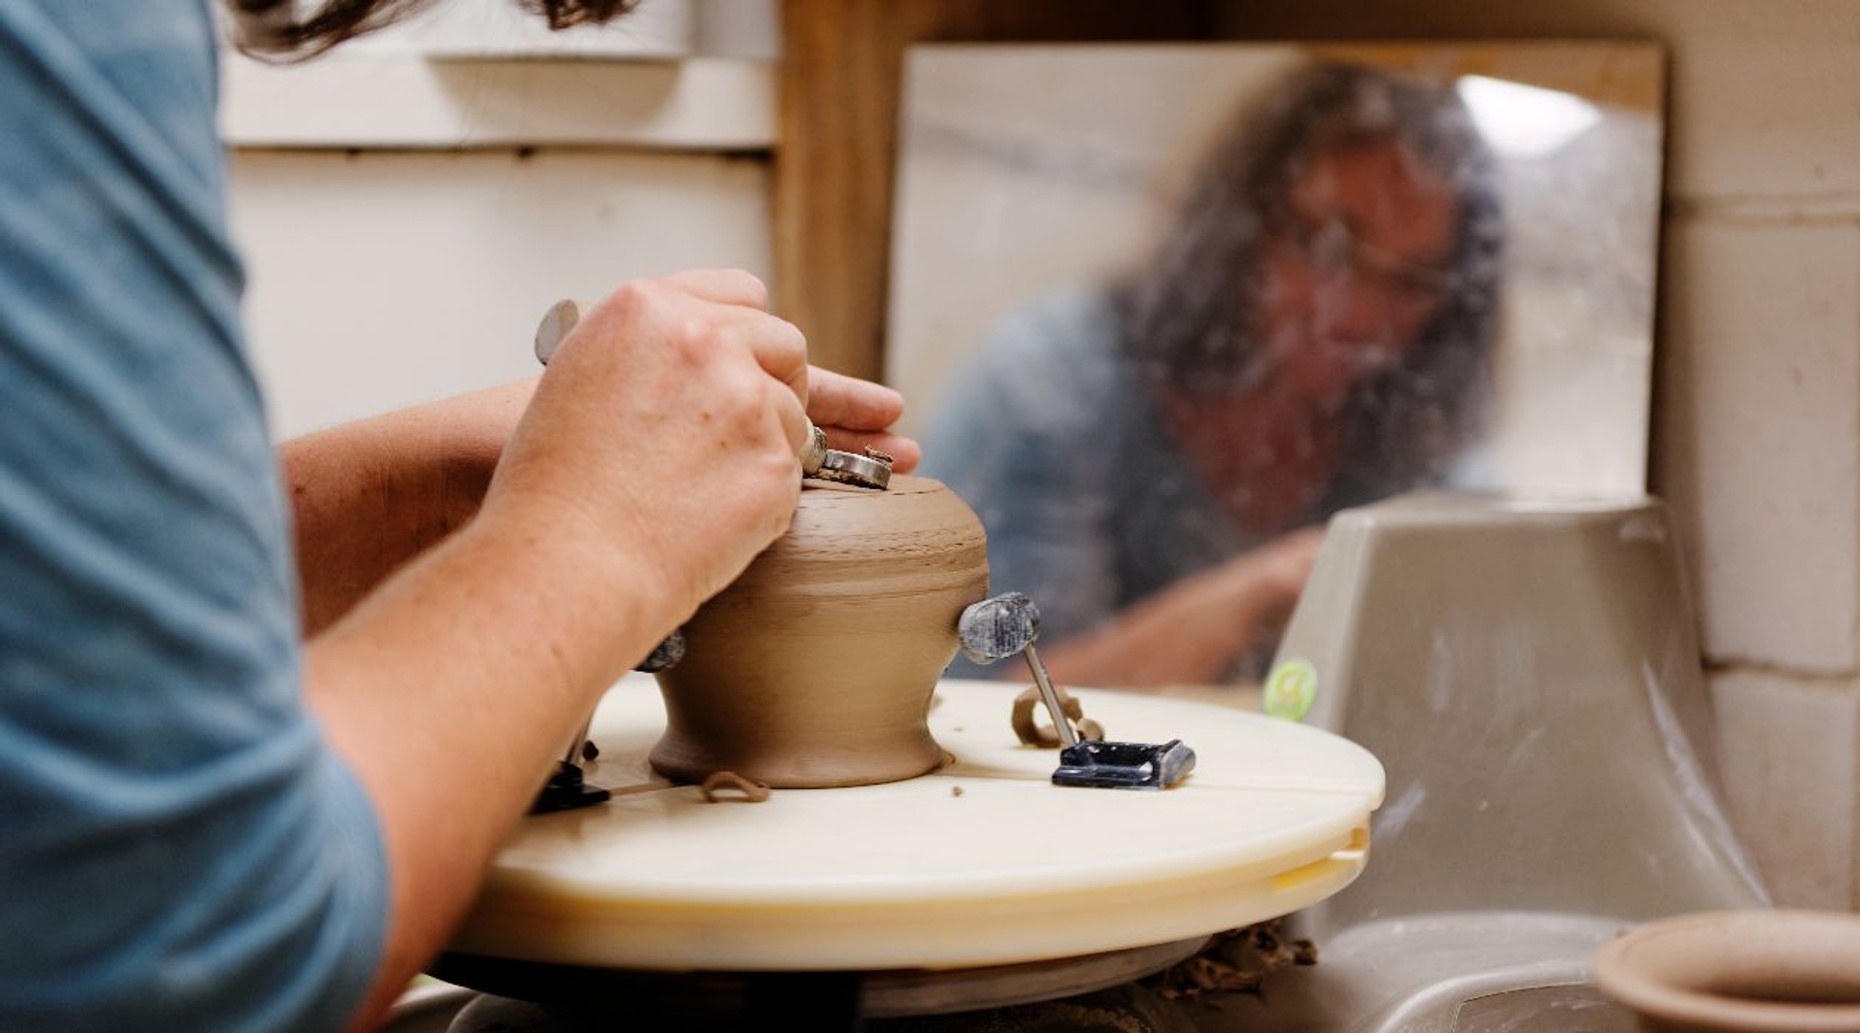 Mud and Merlot Pottery Class in Ellicott City